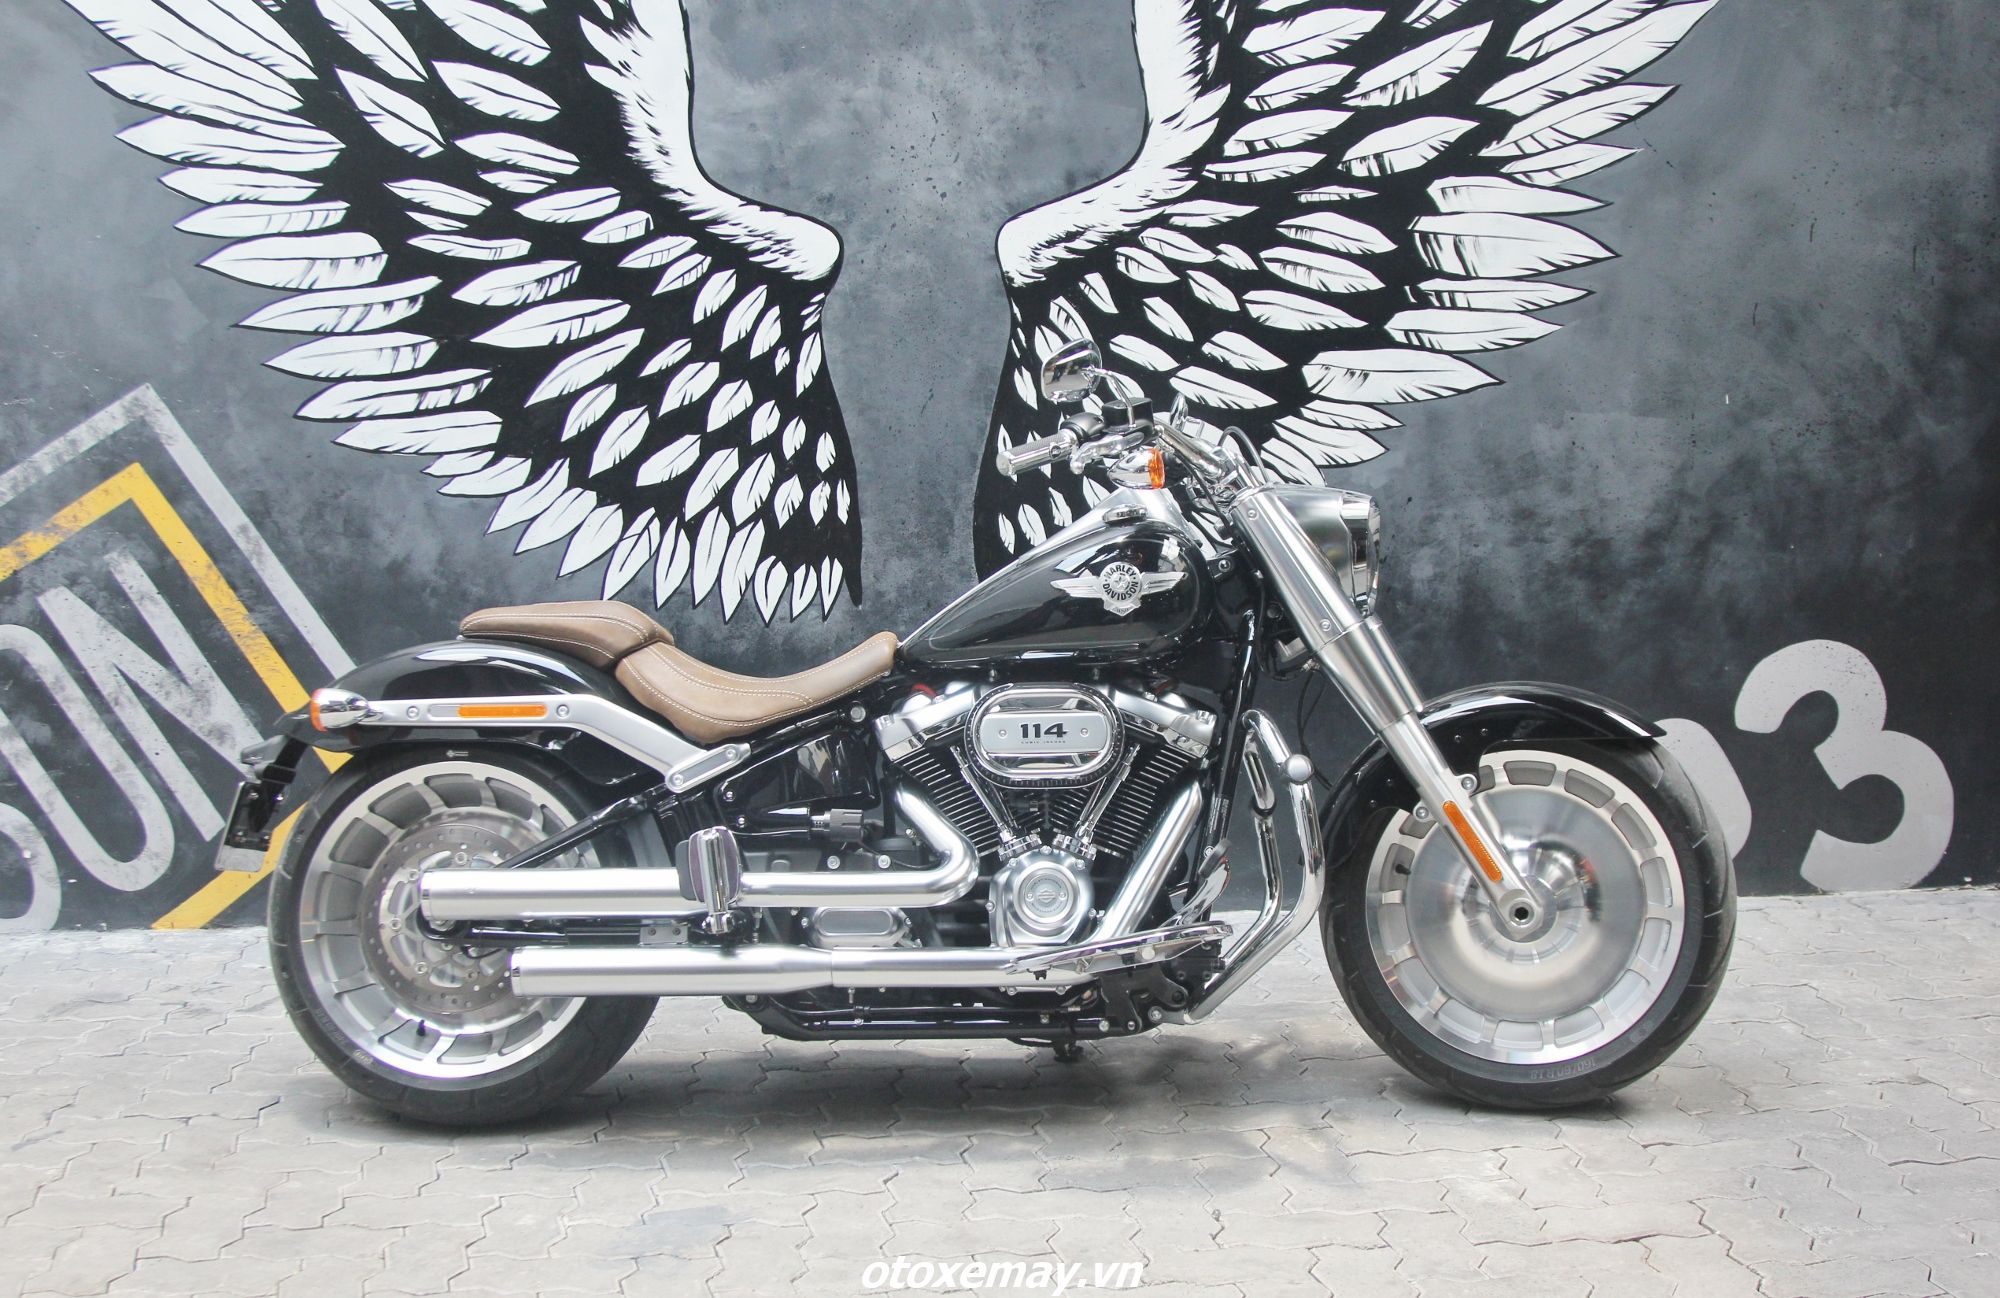 HarleyDavidson celebrate 30 years of the Fat Boy with blackedout special  edition  MCN